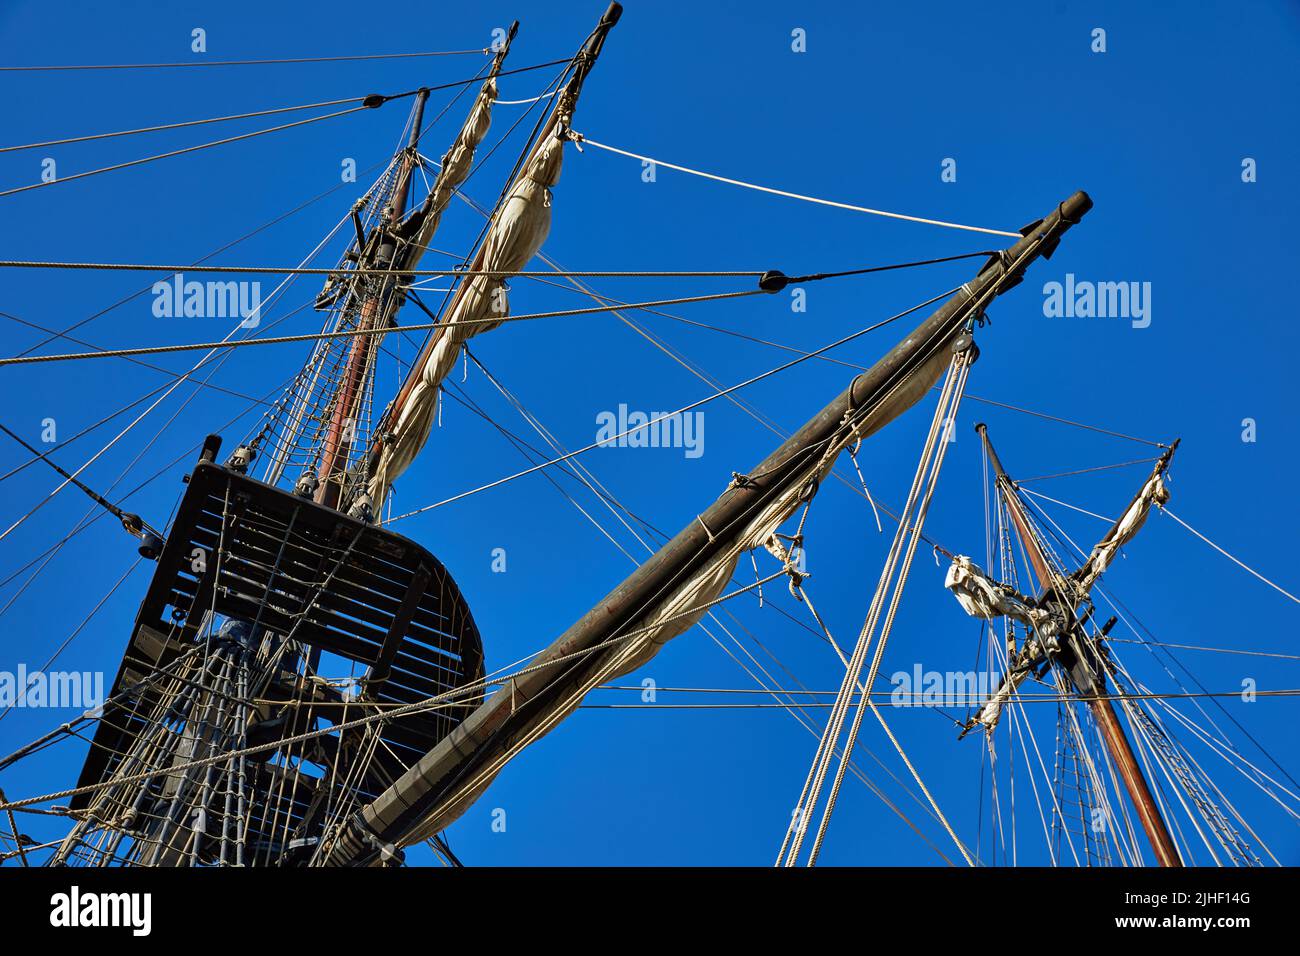 Abtract image of square rigged mast and rigging Stock Photo